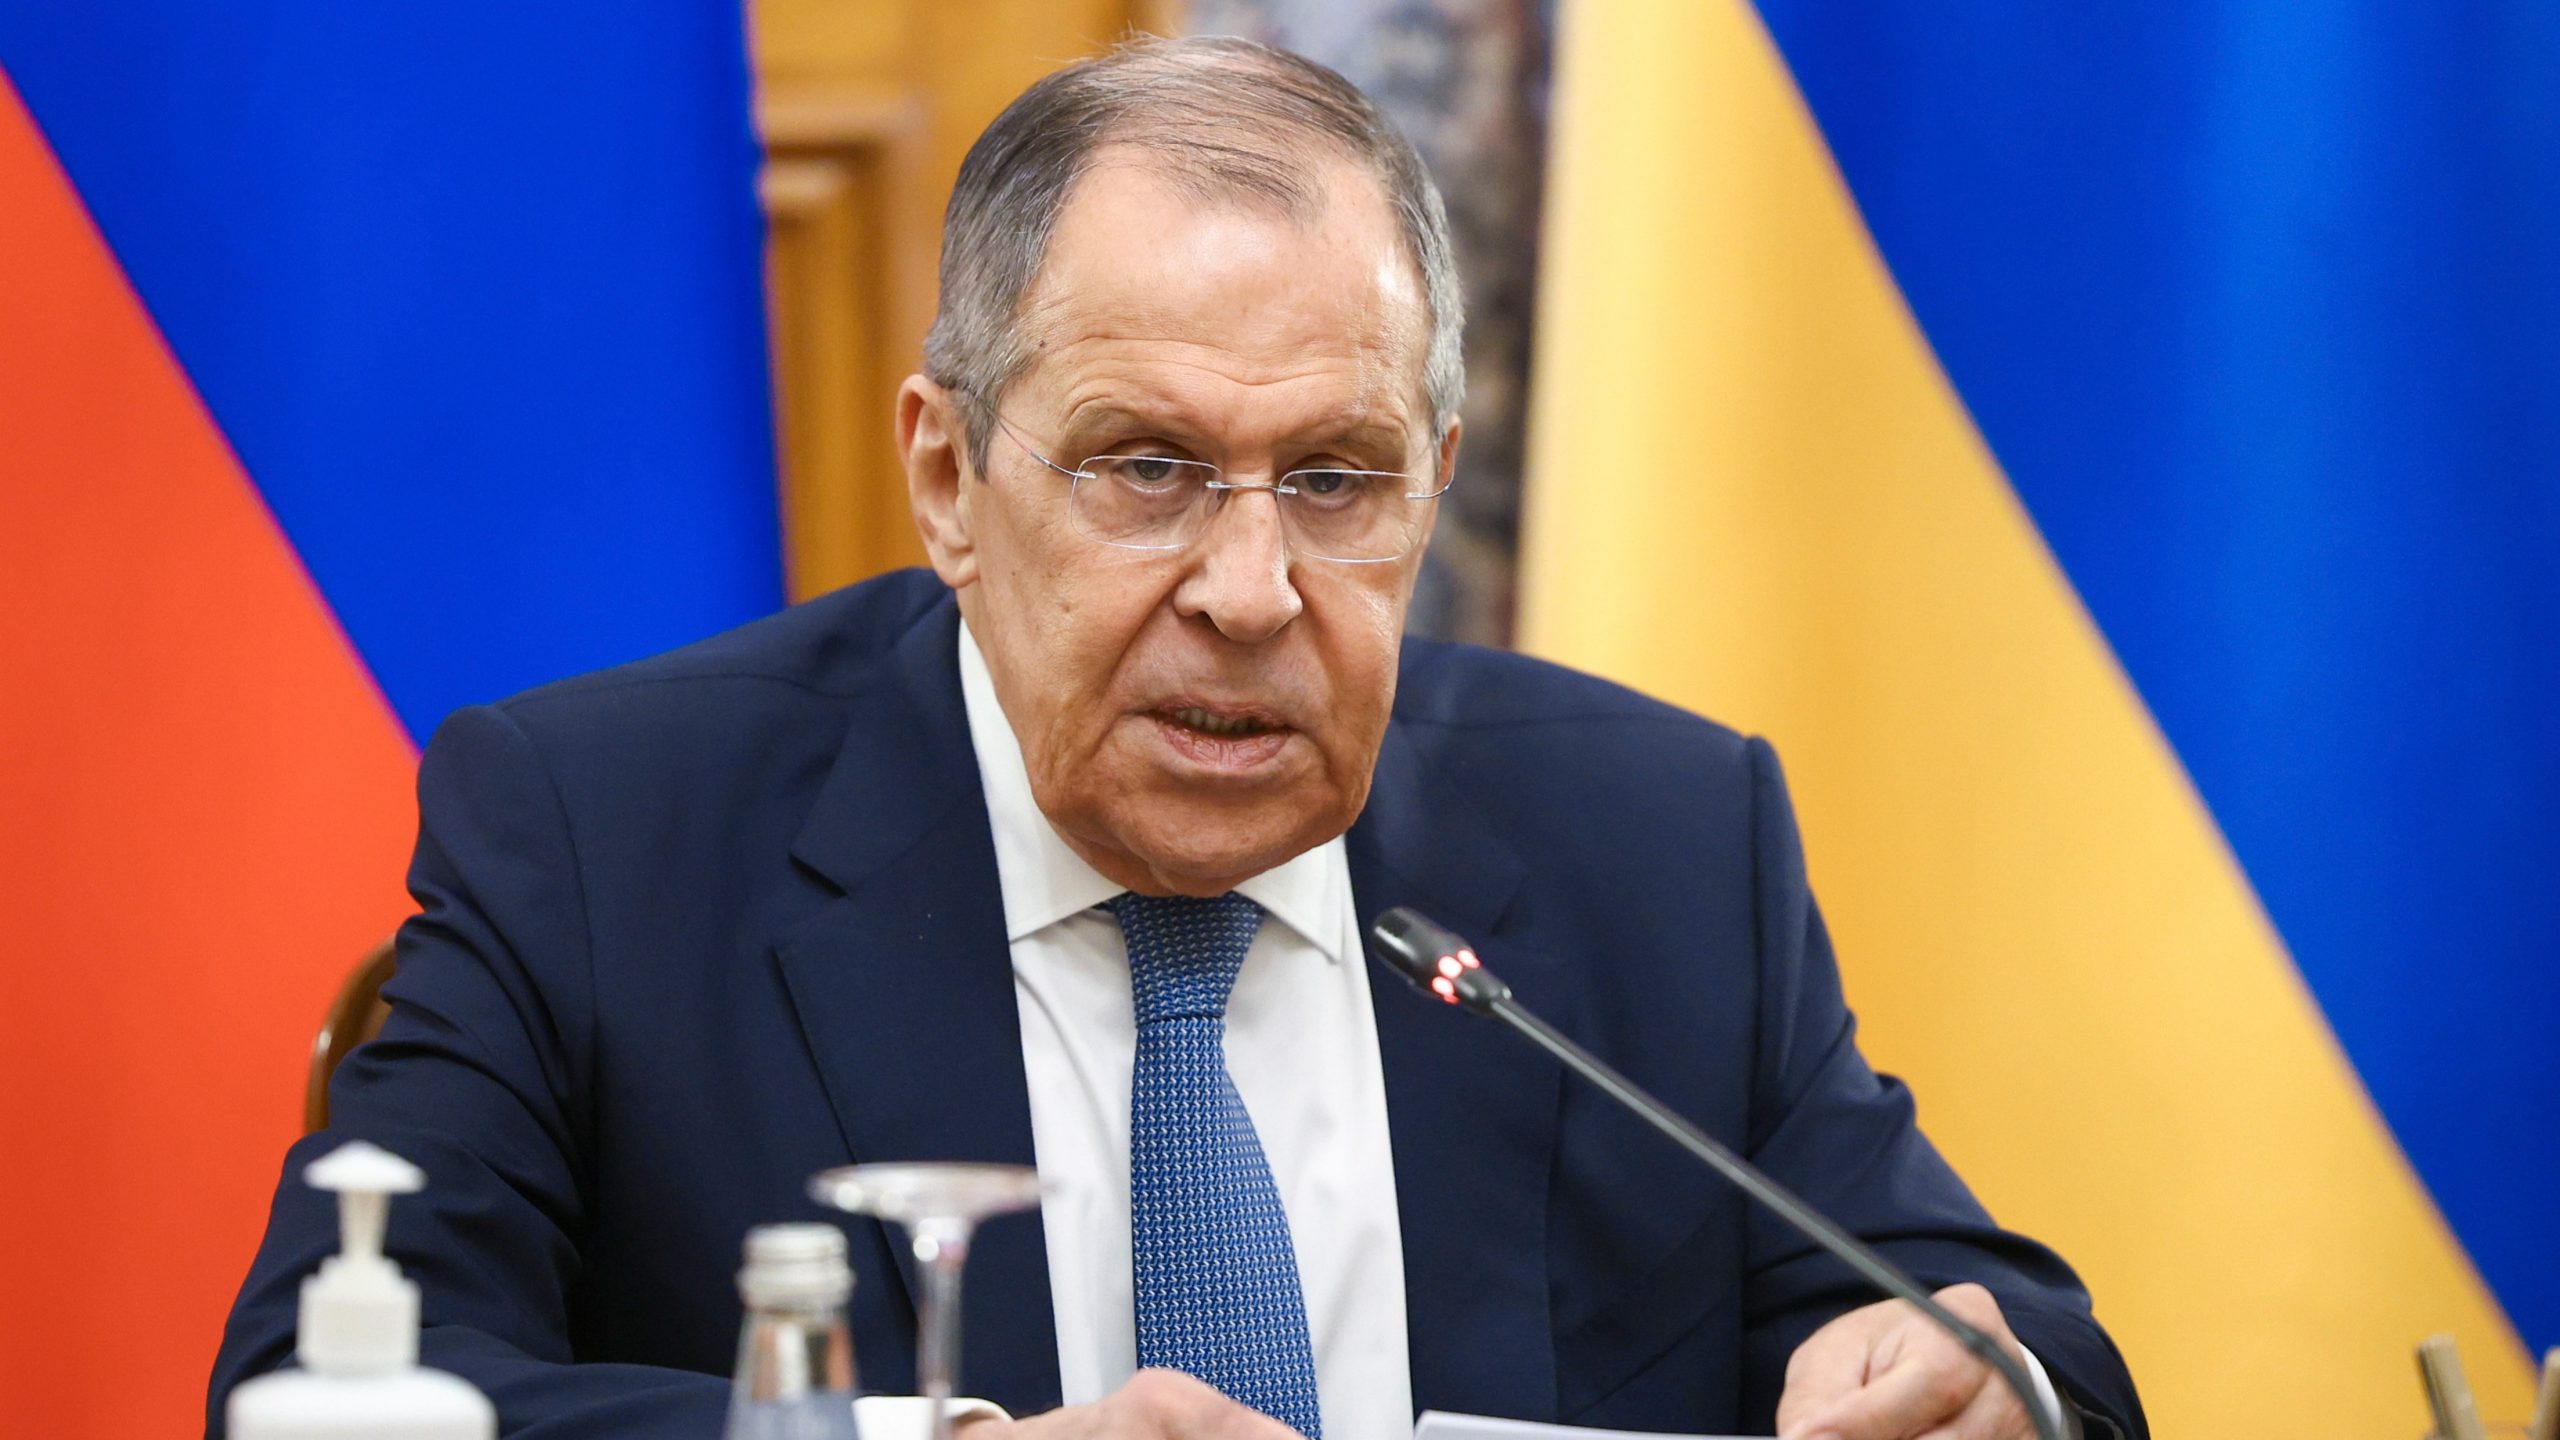 Lavrov: NATO countries are de jure parties to the conflict